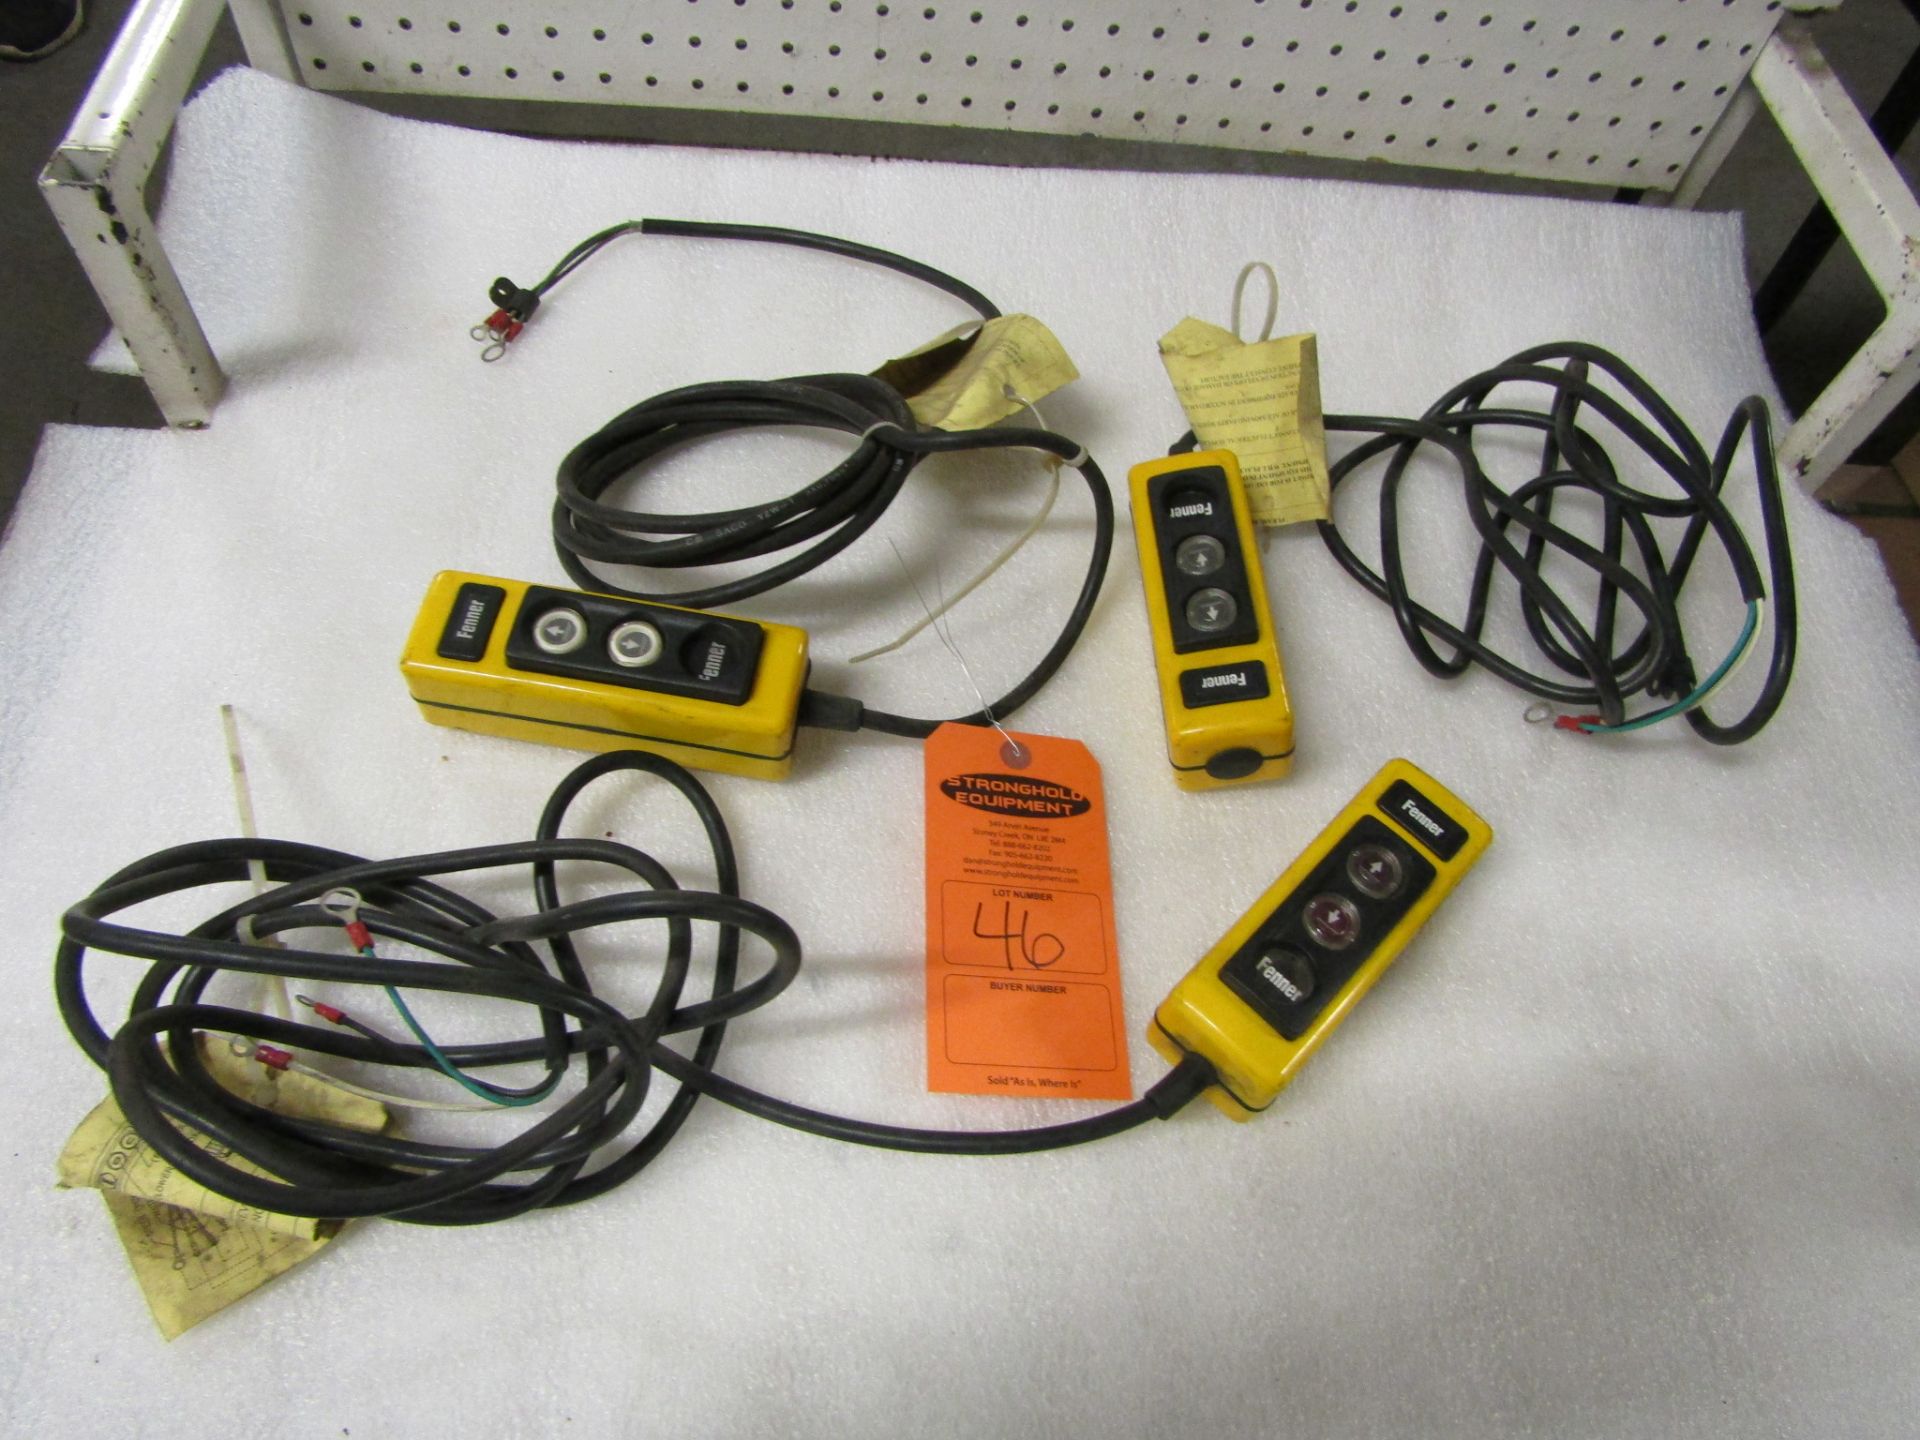 Lot of 10 Fenner pendant controllers